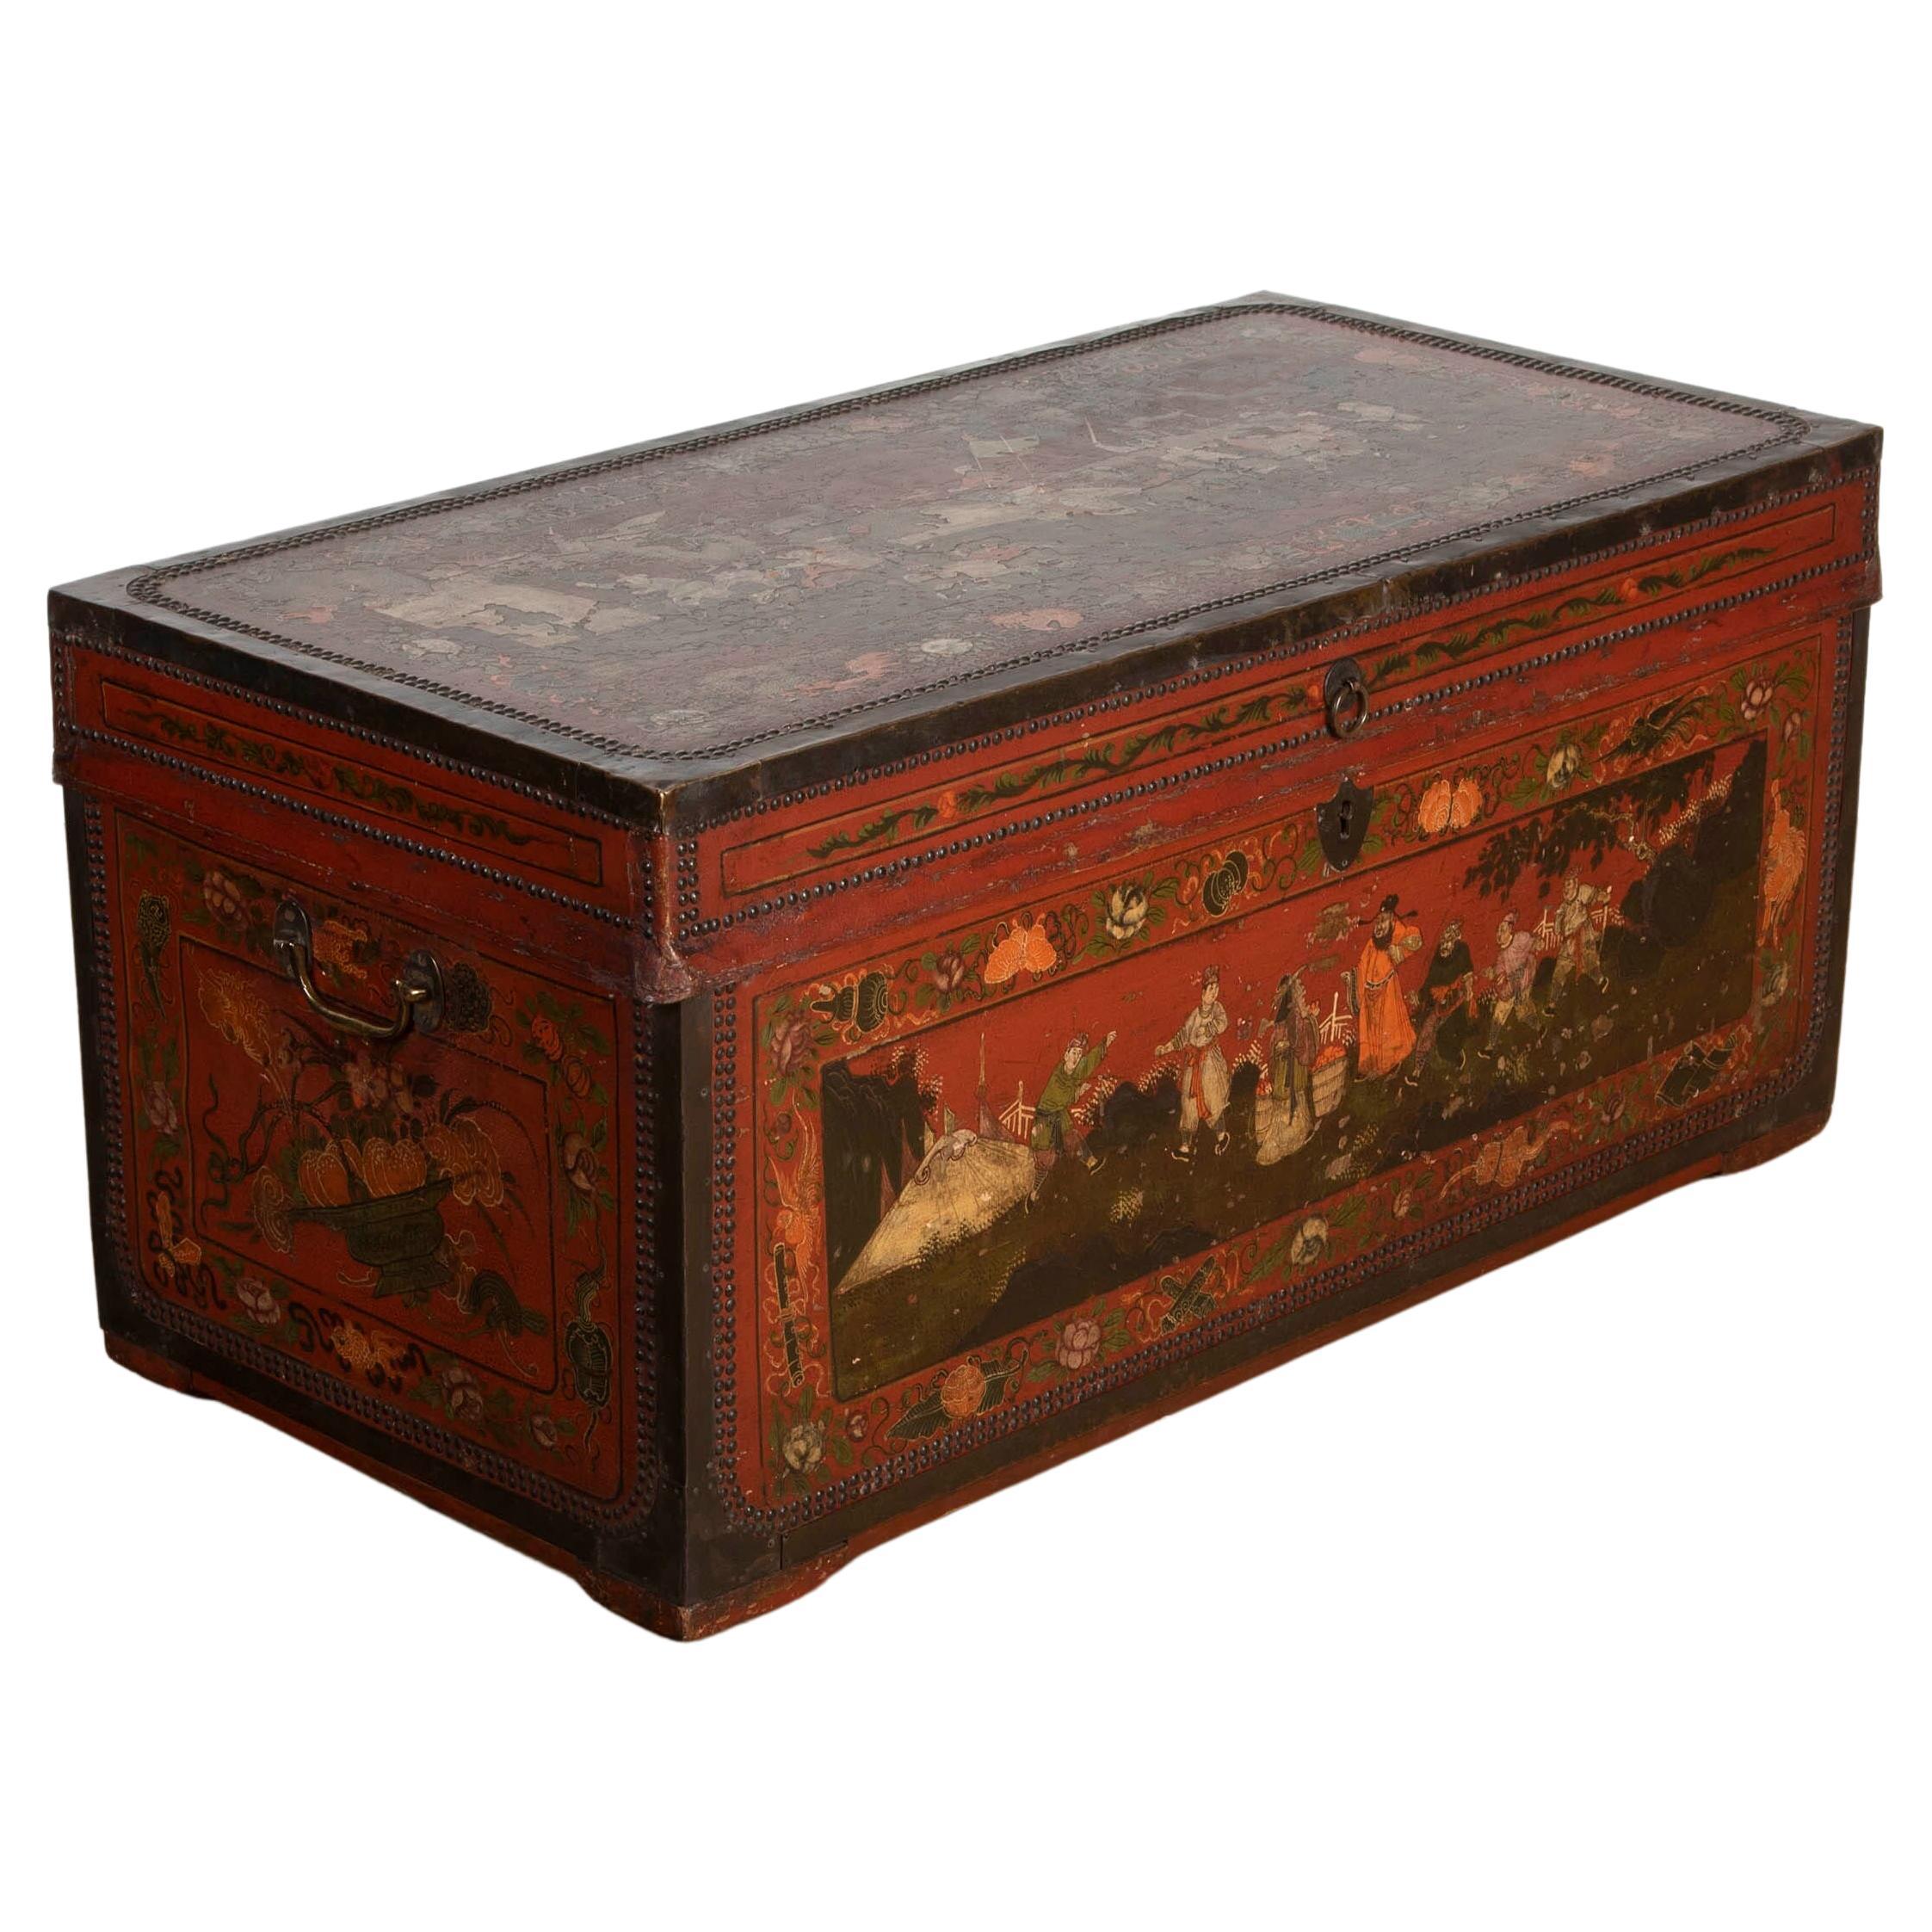 C19th Chinoiserie Decorated Trunk